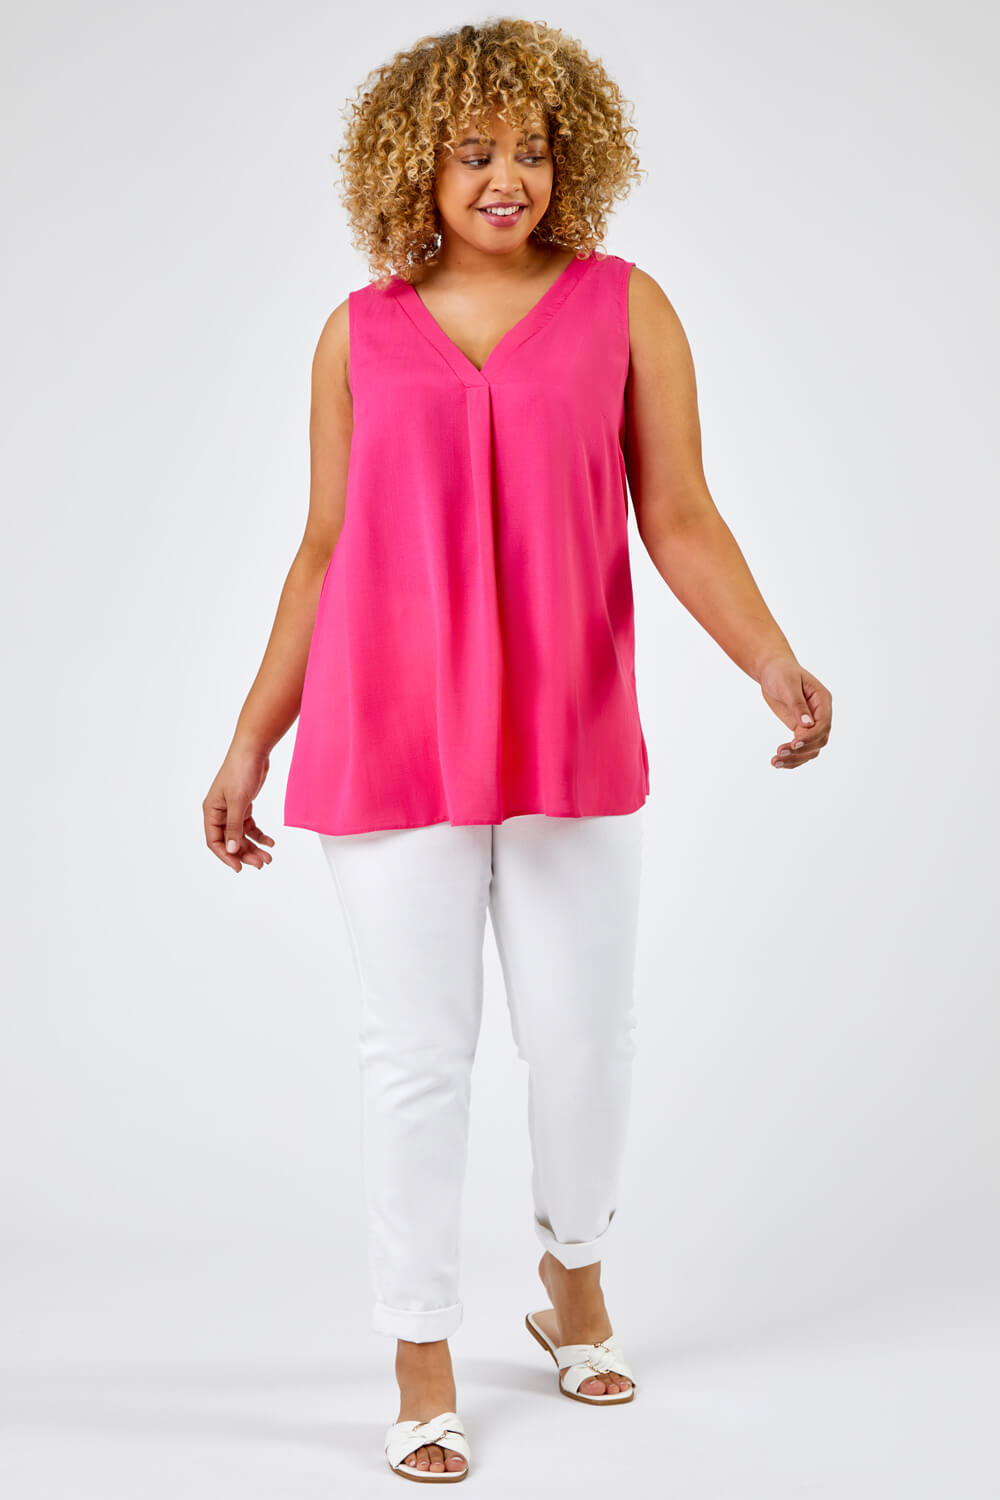 PINK Curve V-Neck Pleat Tank Top, Image 3 of 5